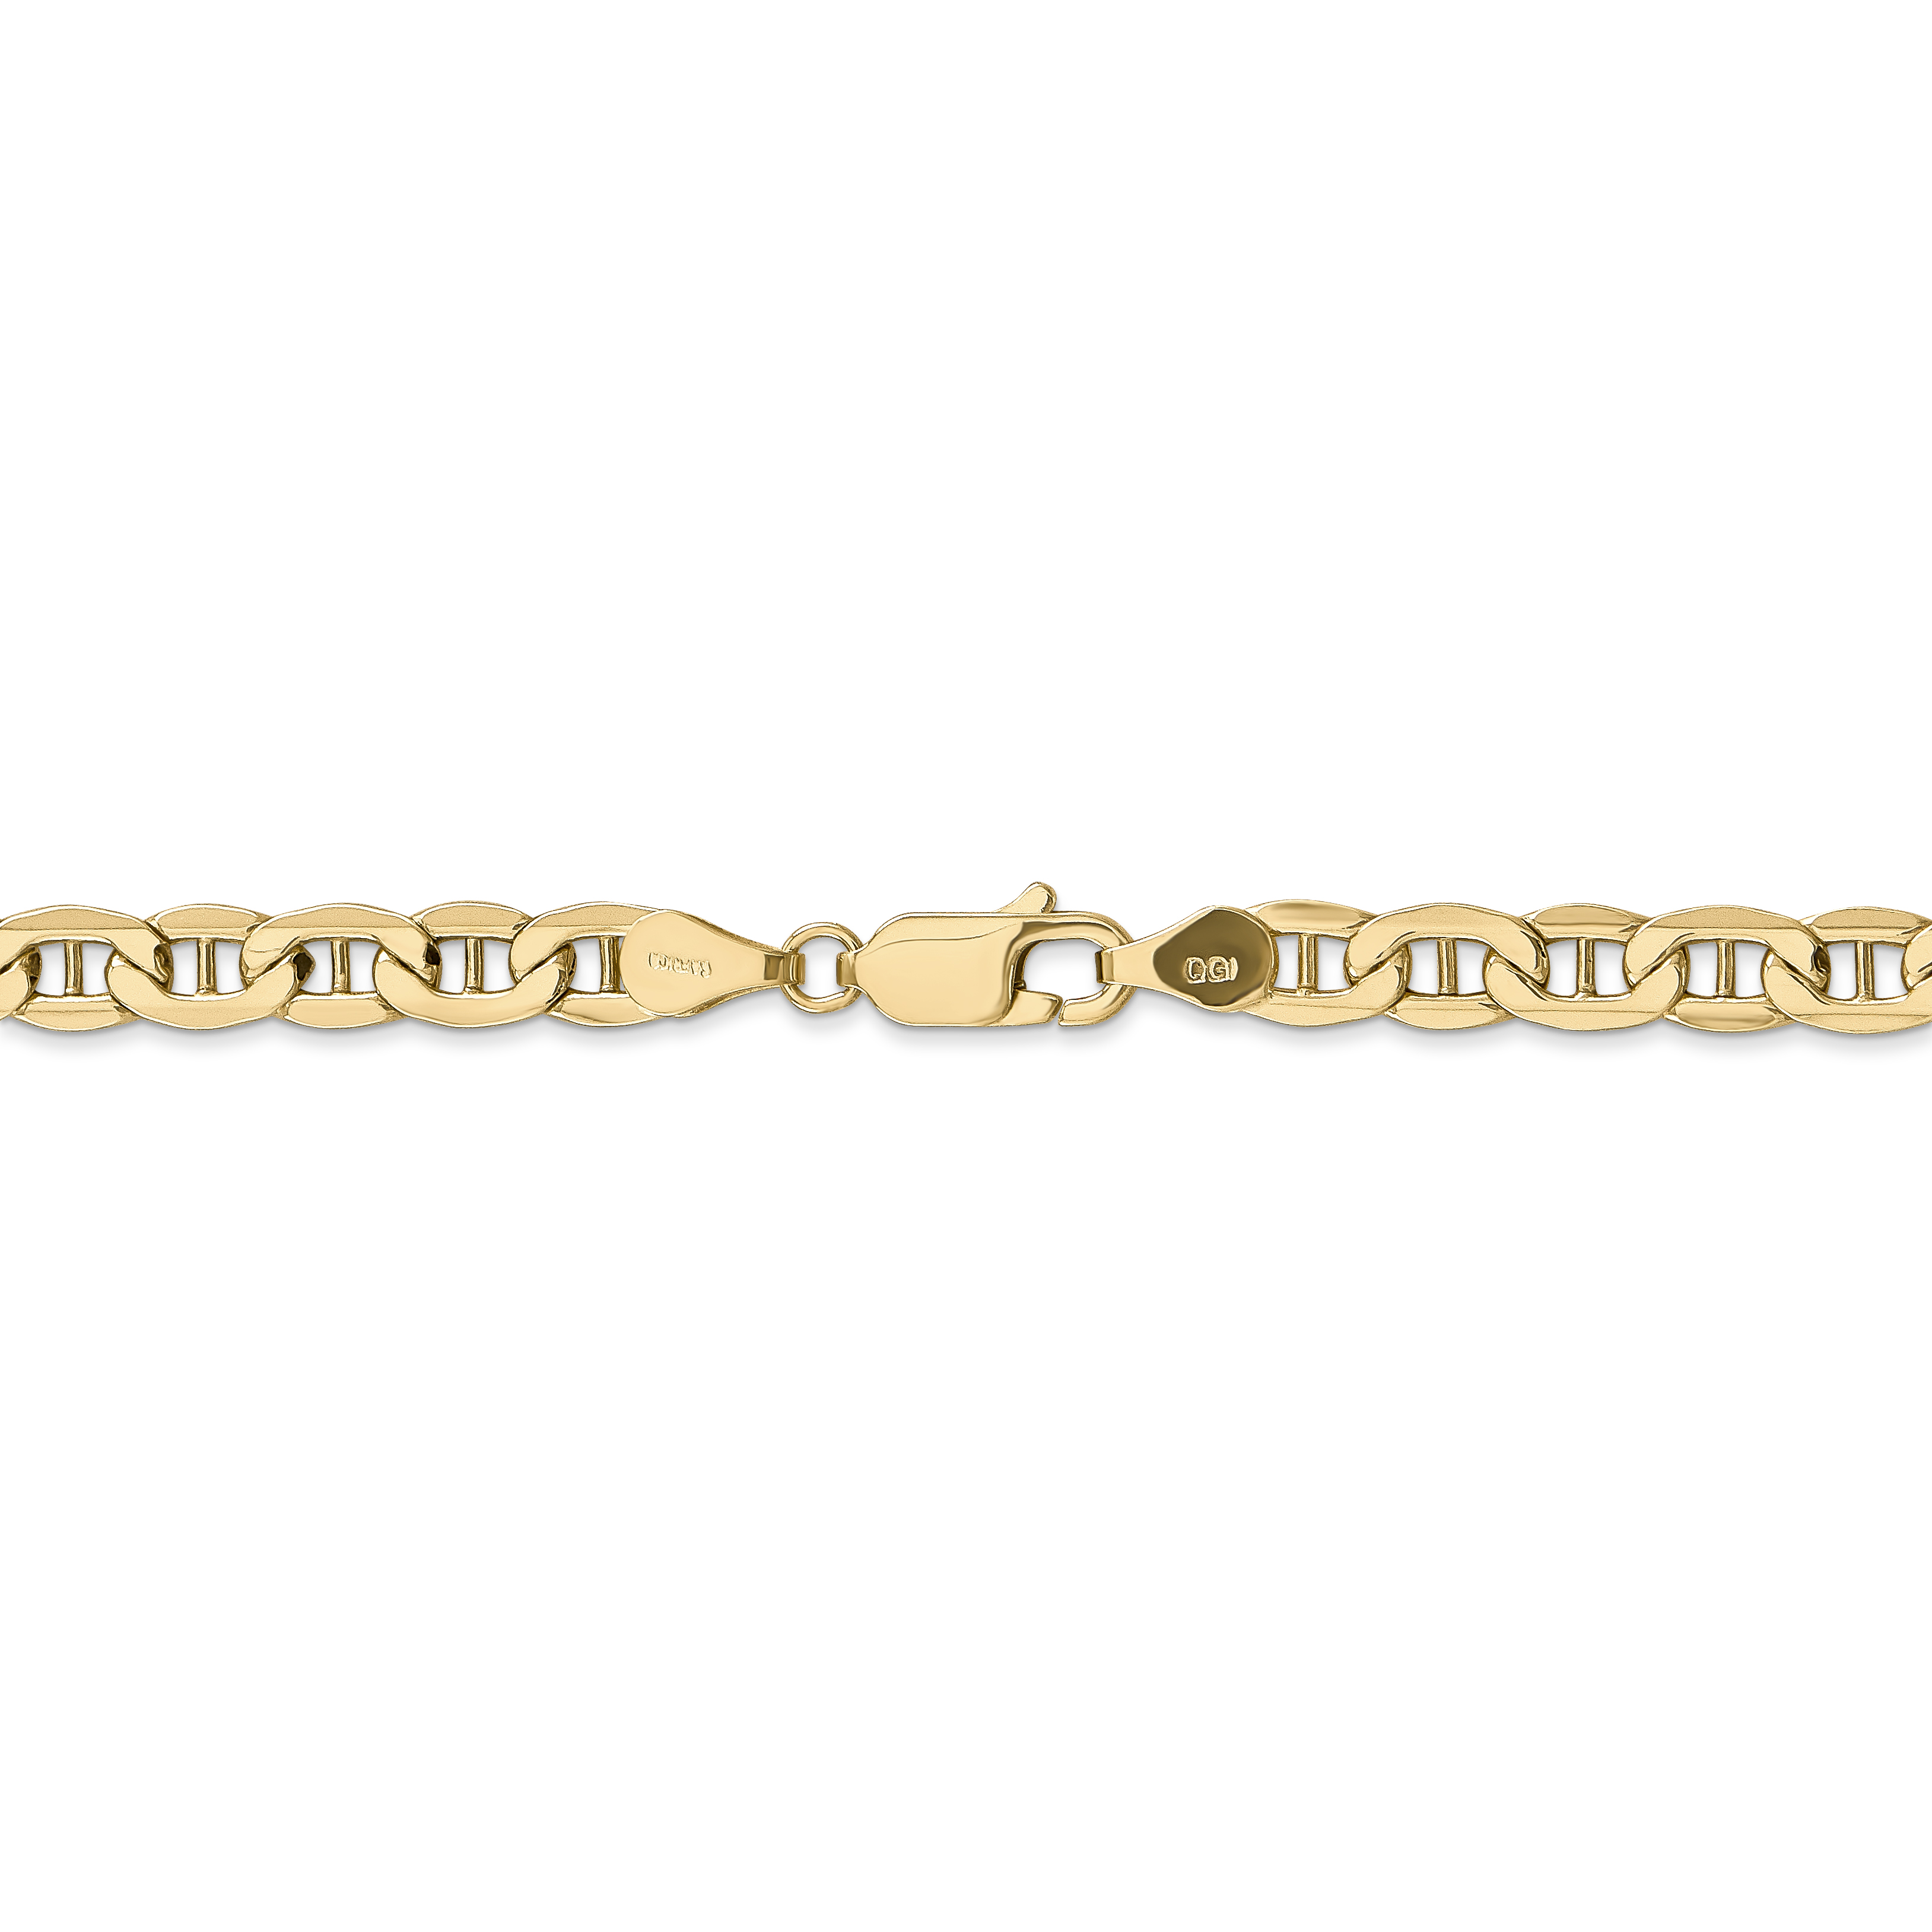 Primal Gold 14 Karat Yellow Gold 4.75mm Semi-Solid Anchor Chain - image 5 of 7